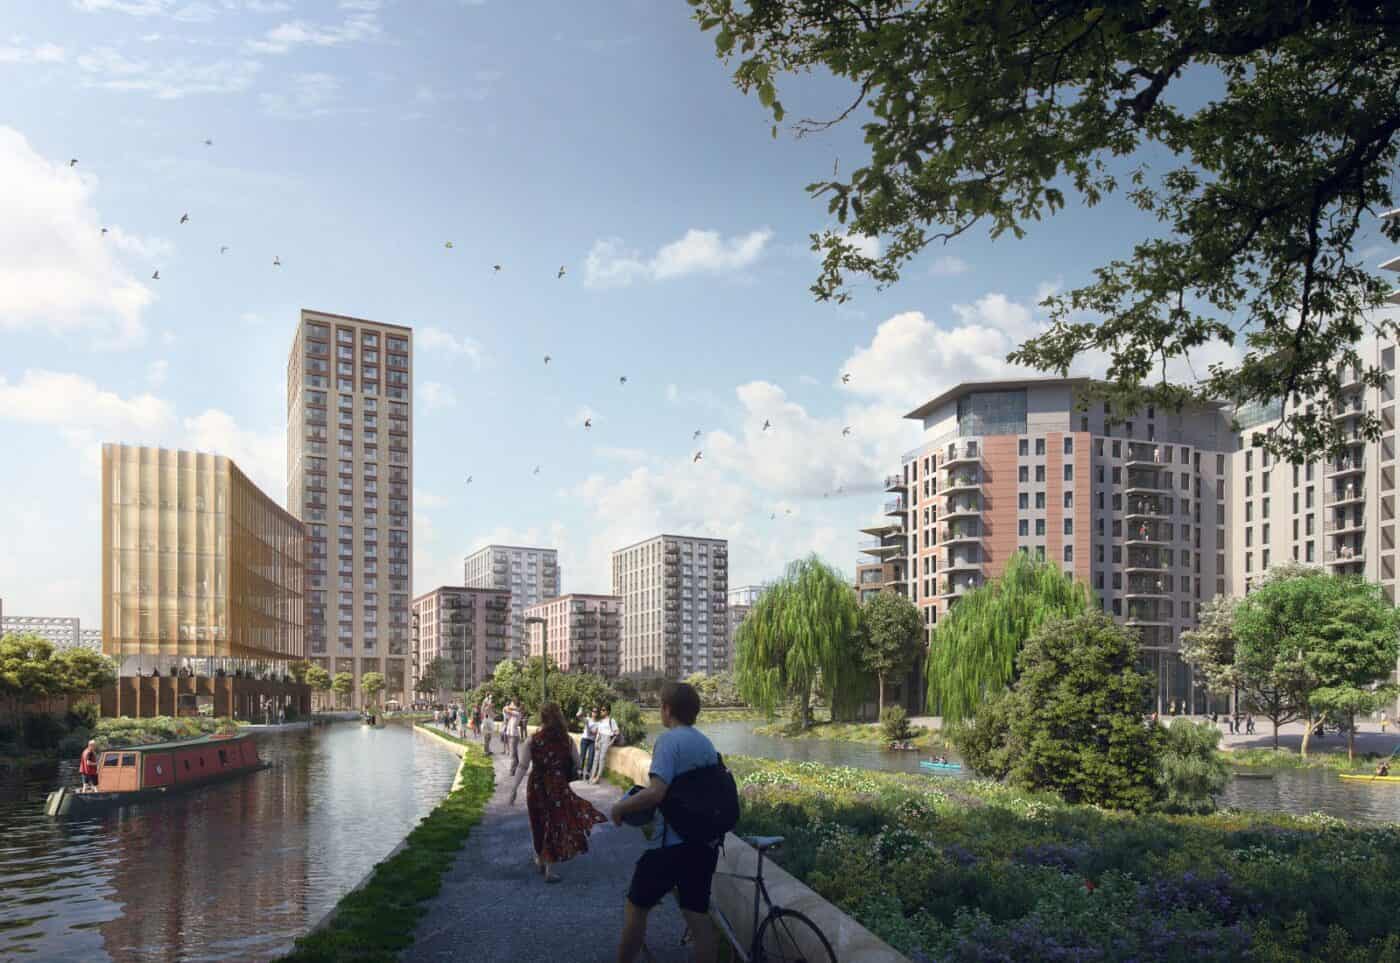 CGI of Leeds canalside showing people walking and riding their bikes with apartment blocks in the background